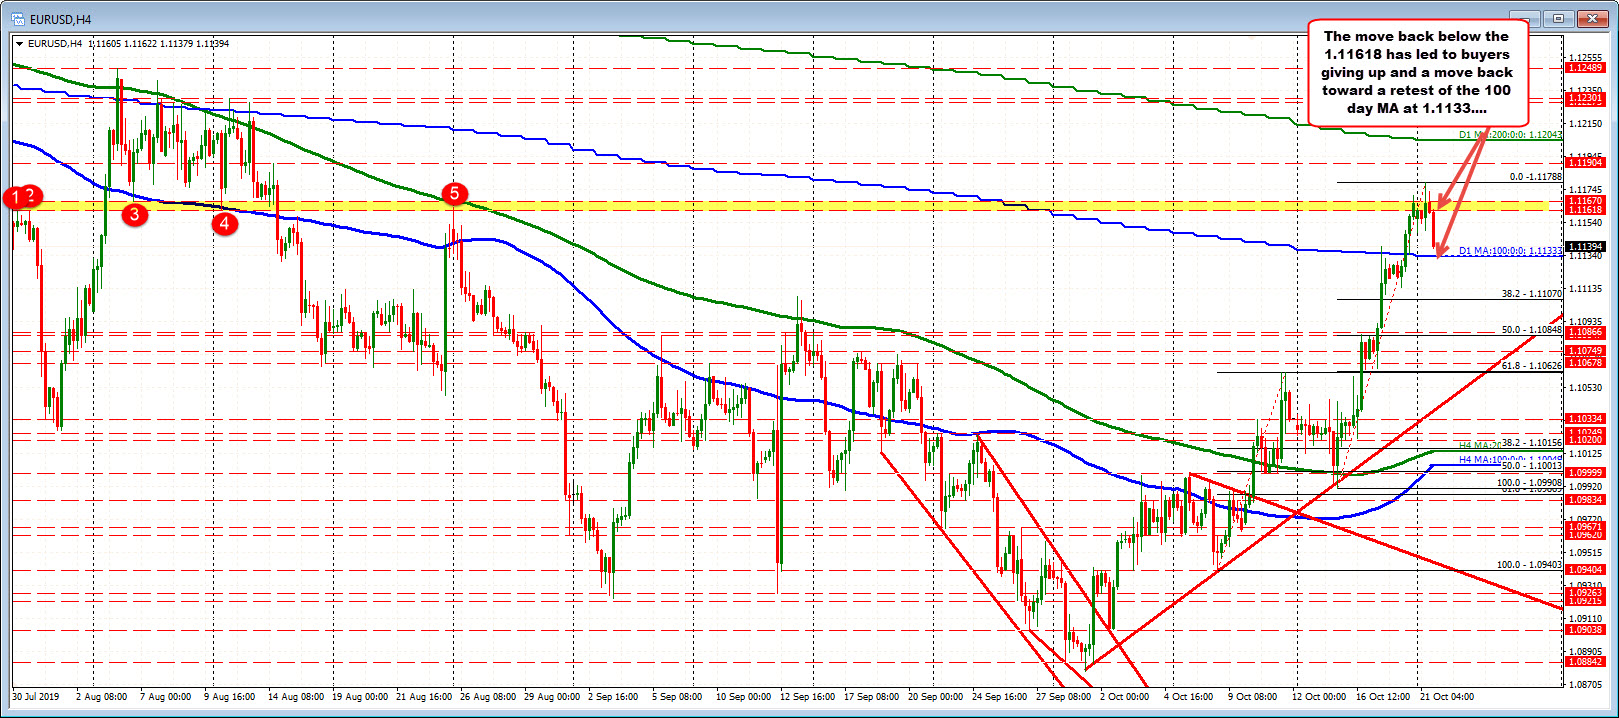 The 1.11618 level was broken and the price momentum tilted back to the downside.